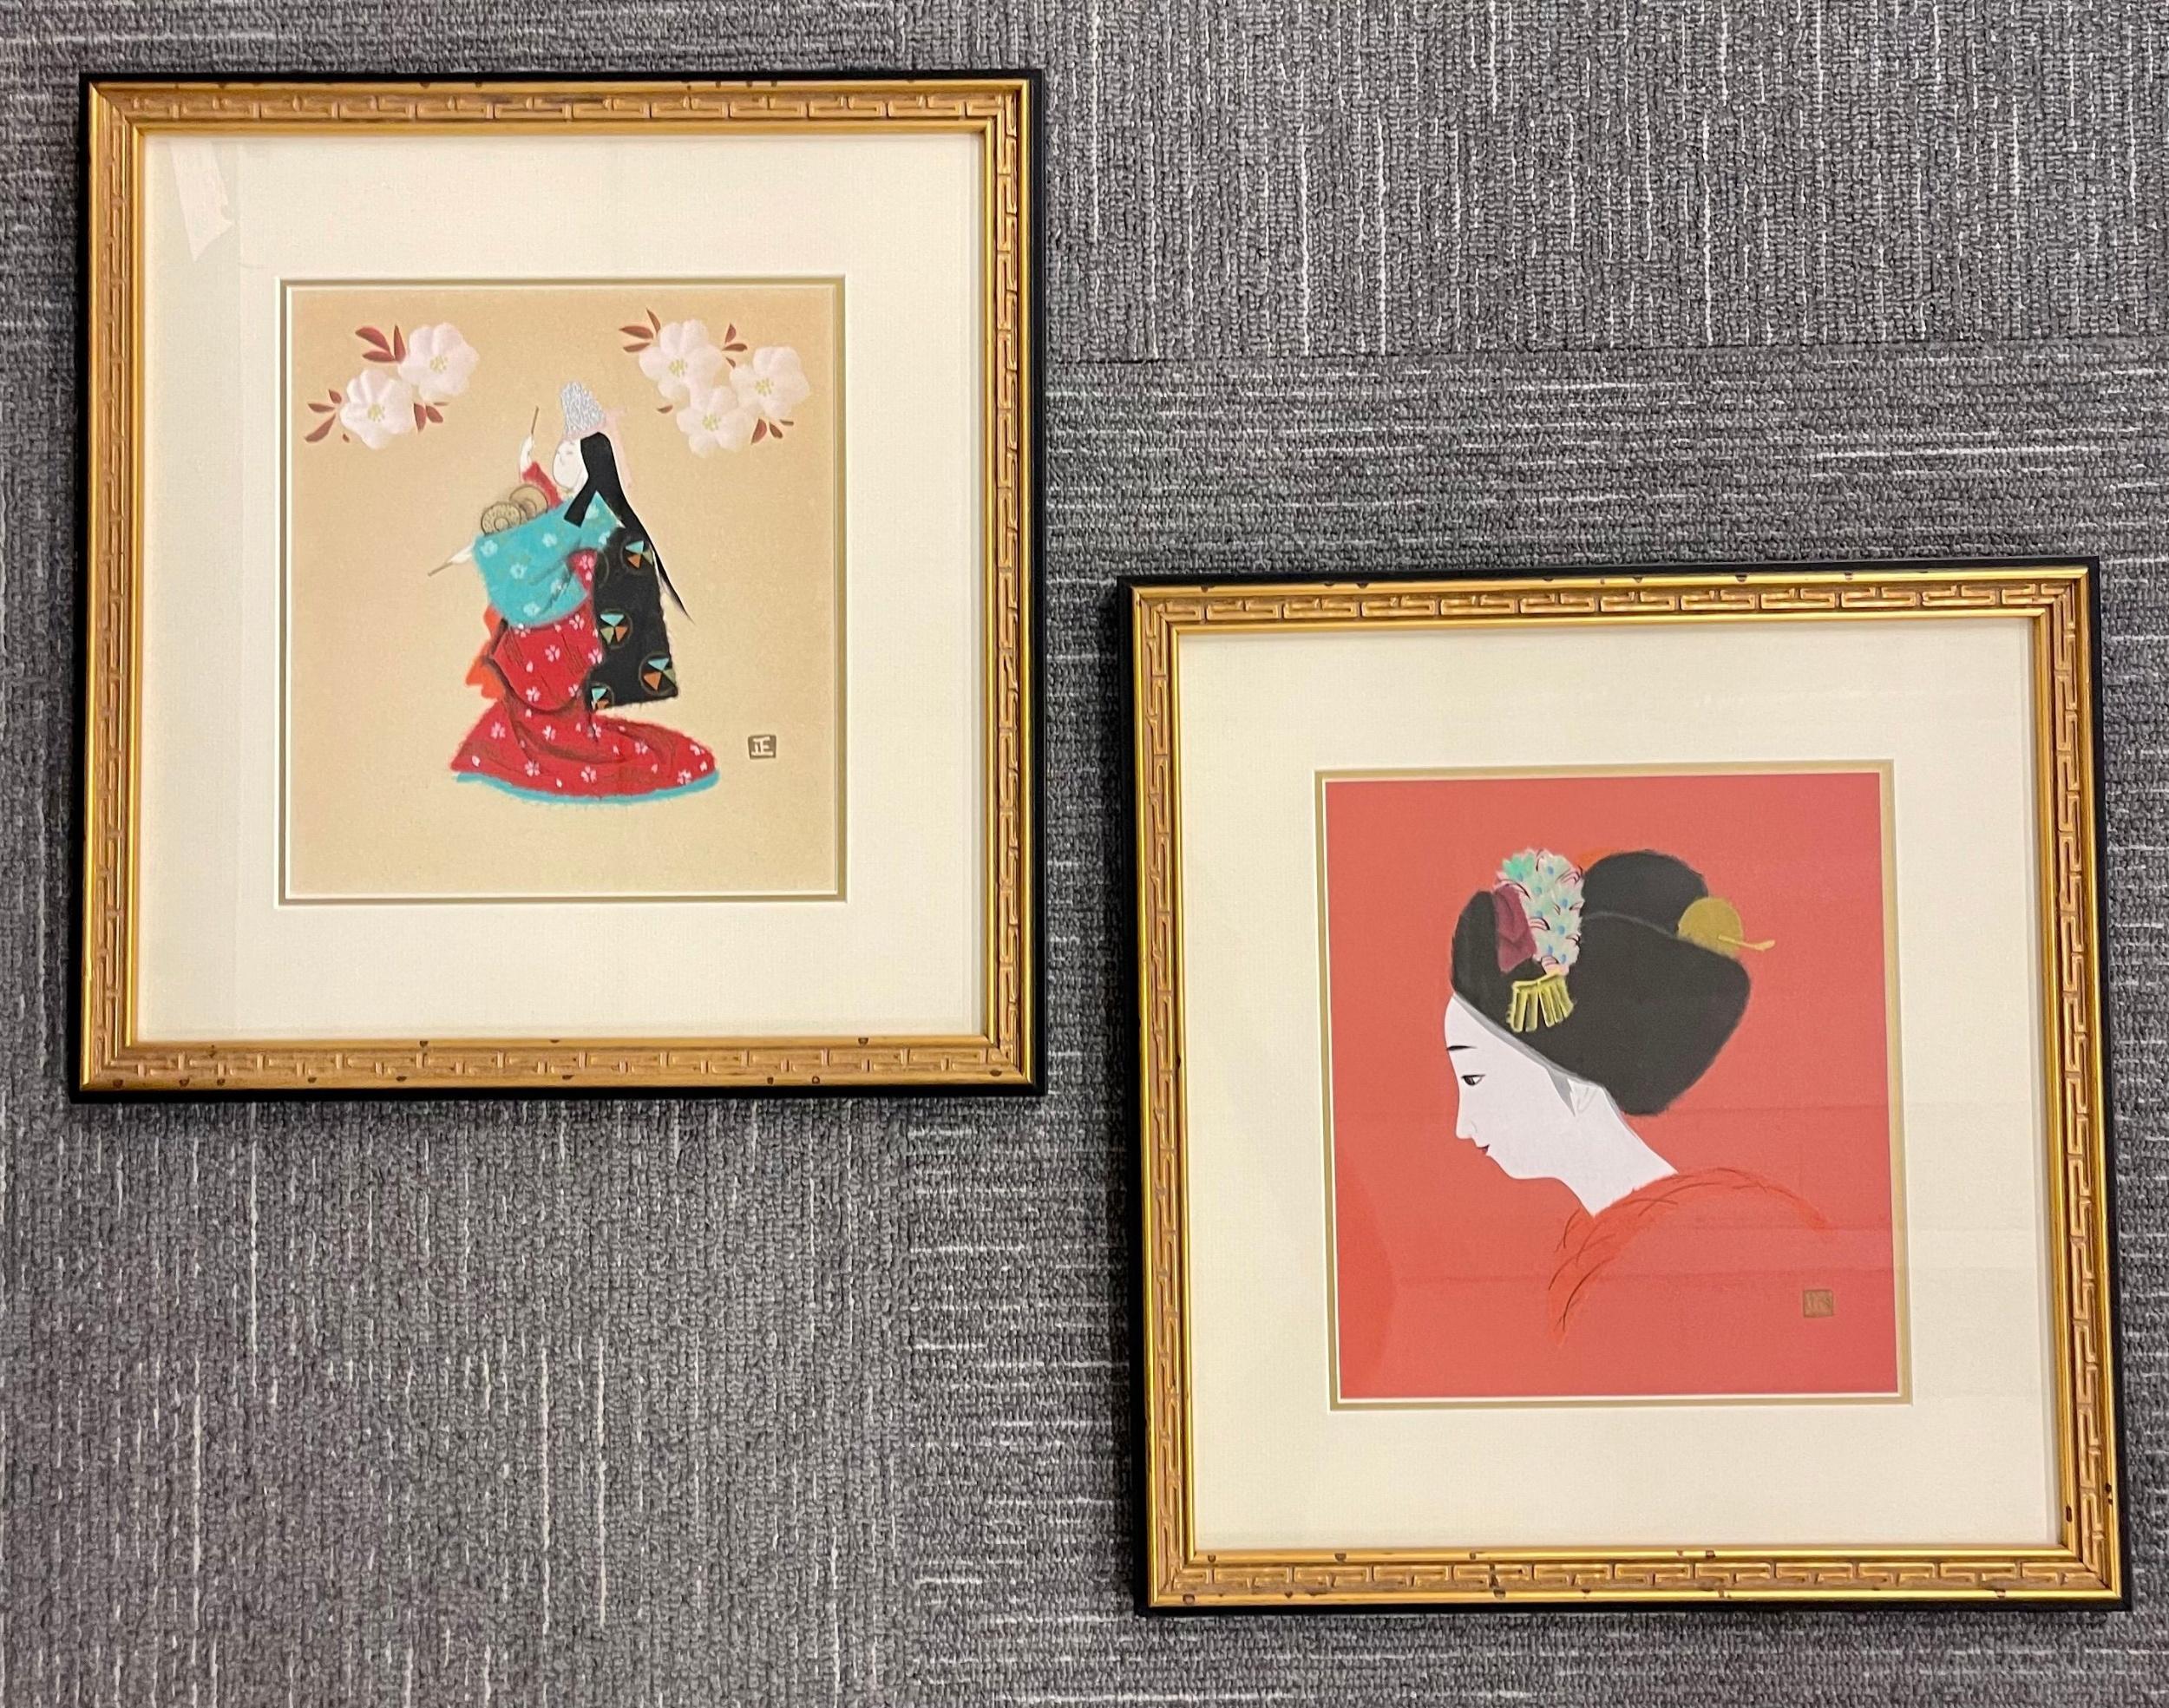 A Pair of Finely Framed Japanese Woodblocks. Each of a Geisha in dress the pair both having artist signature in Japanese. Both in fine custom matted frames of gilt and ebony design having Greek key design borders.